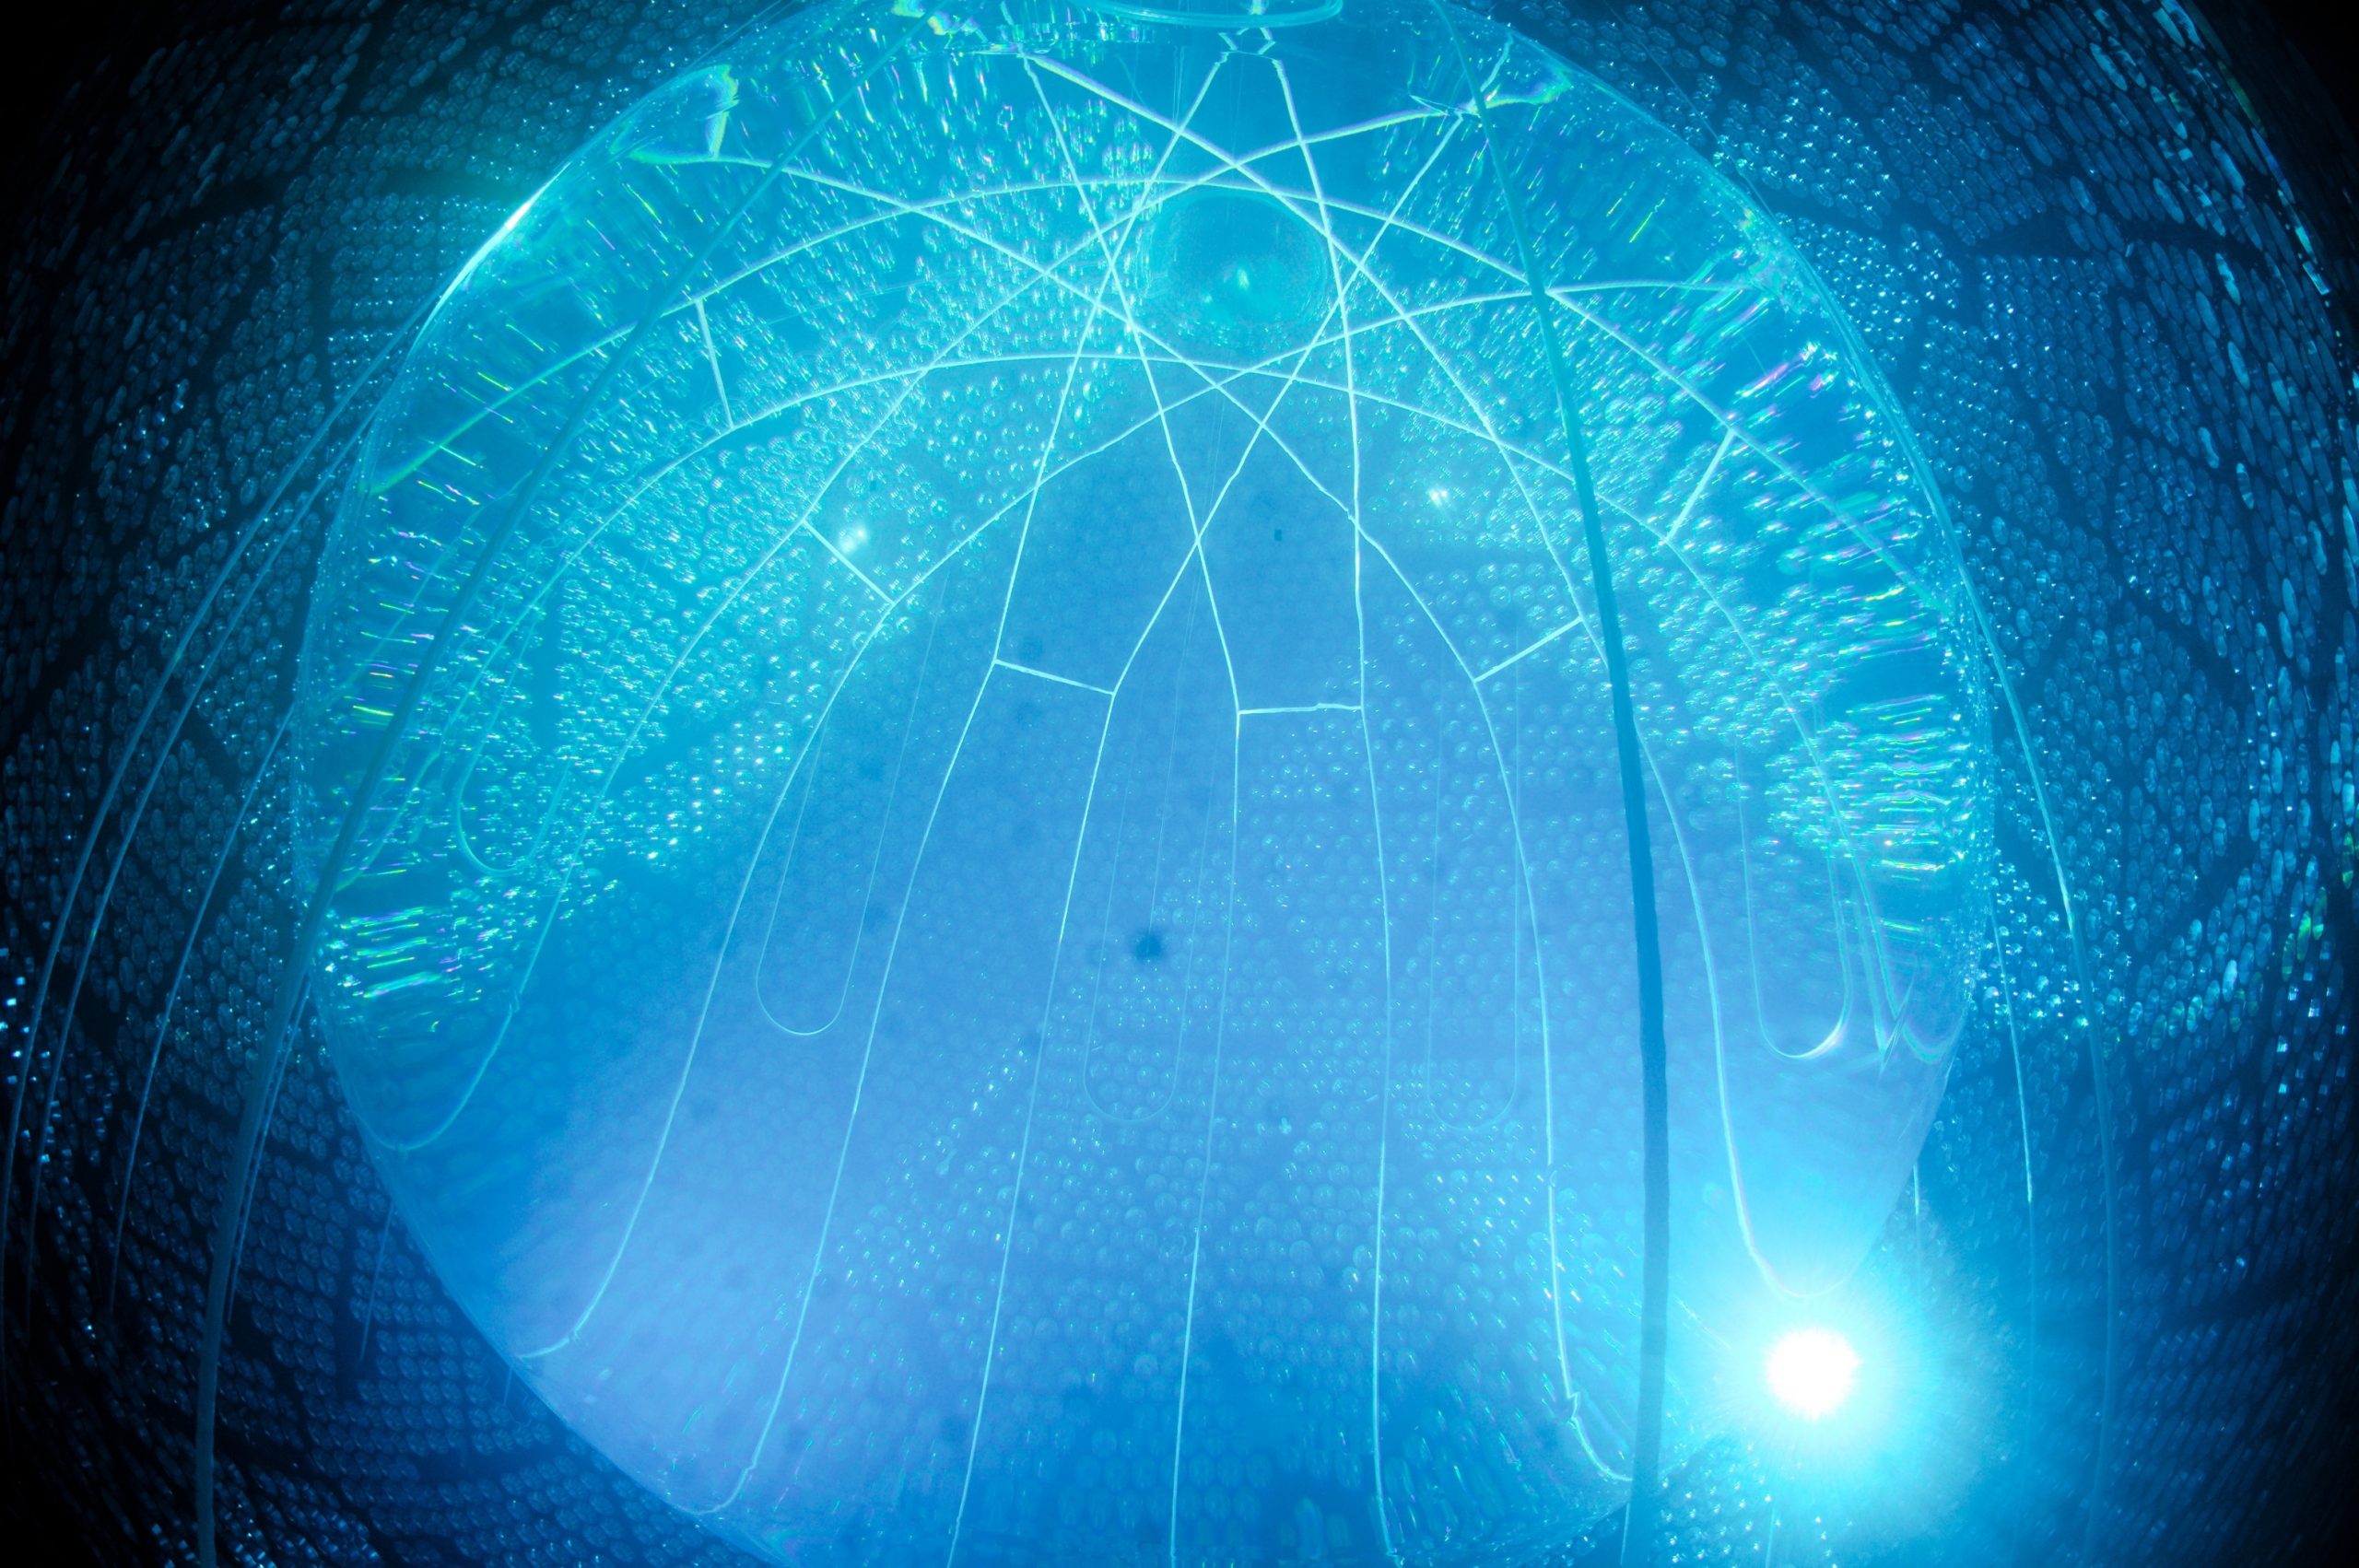 A bright, transparent circle surrounded by blue light and a very bright light from the spotlight in the bottom right corner. The background seen through the transparent circle appears textured from the PMTs and rope suspension system.